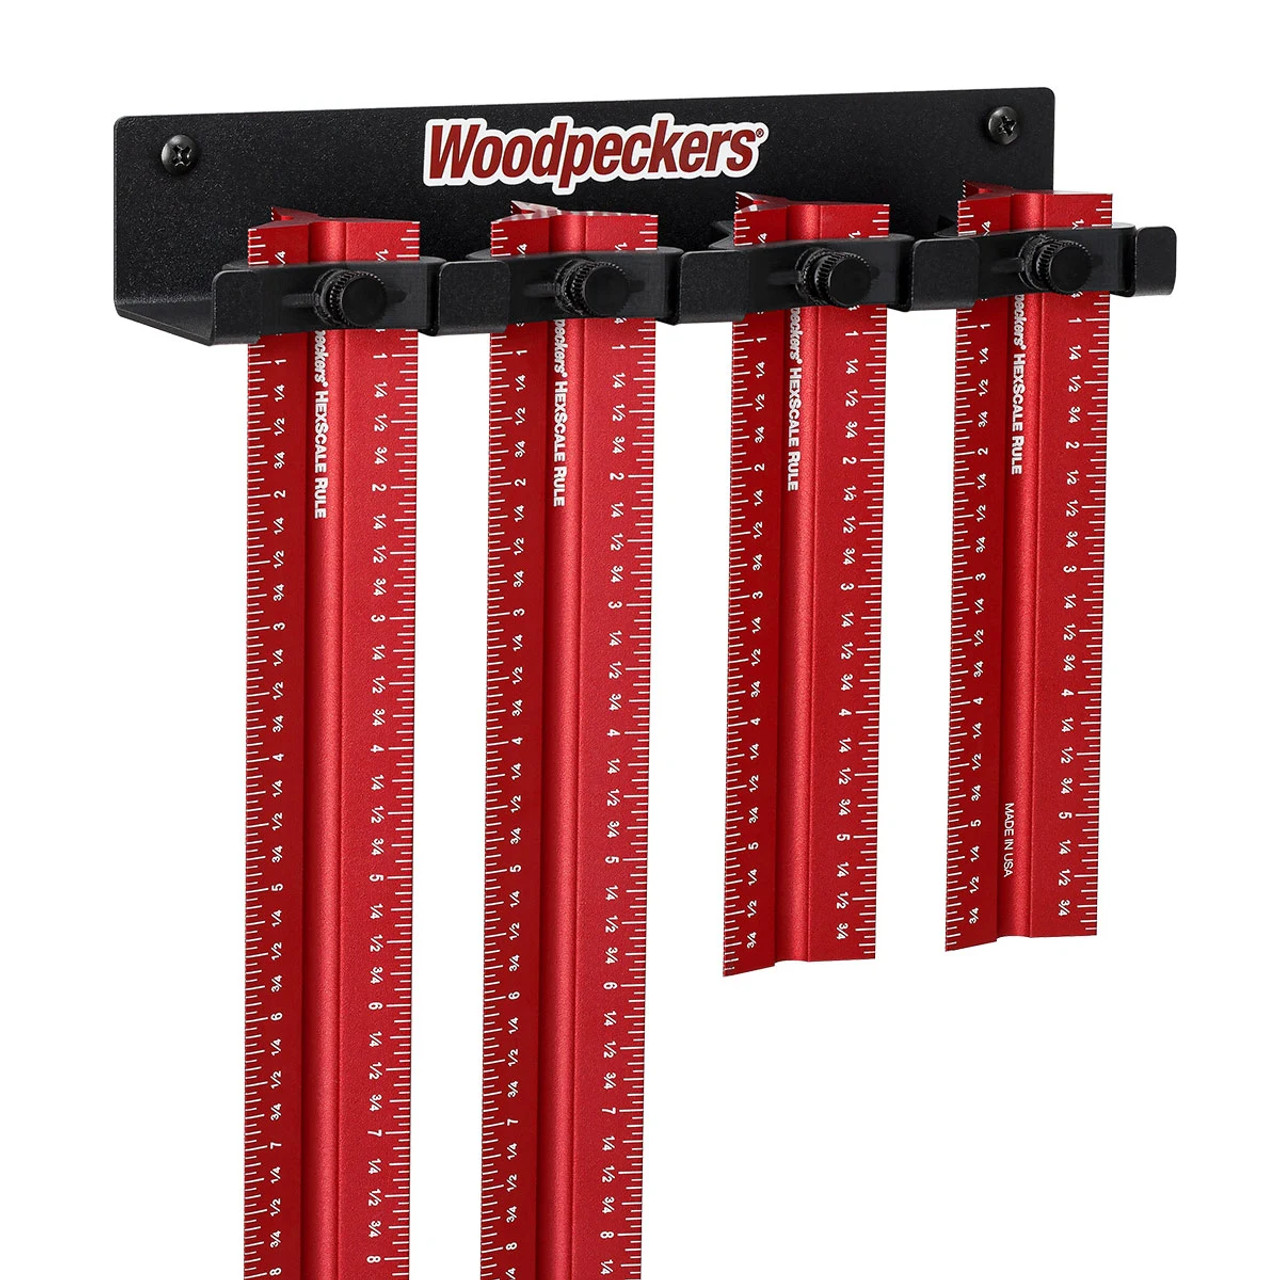 Precision Measuring Tool - Woodpeckers HEXSCALE RULE 36 / 900mm